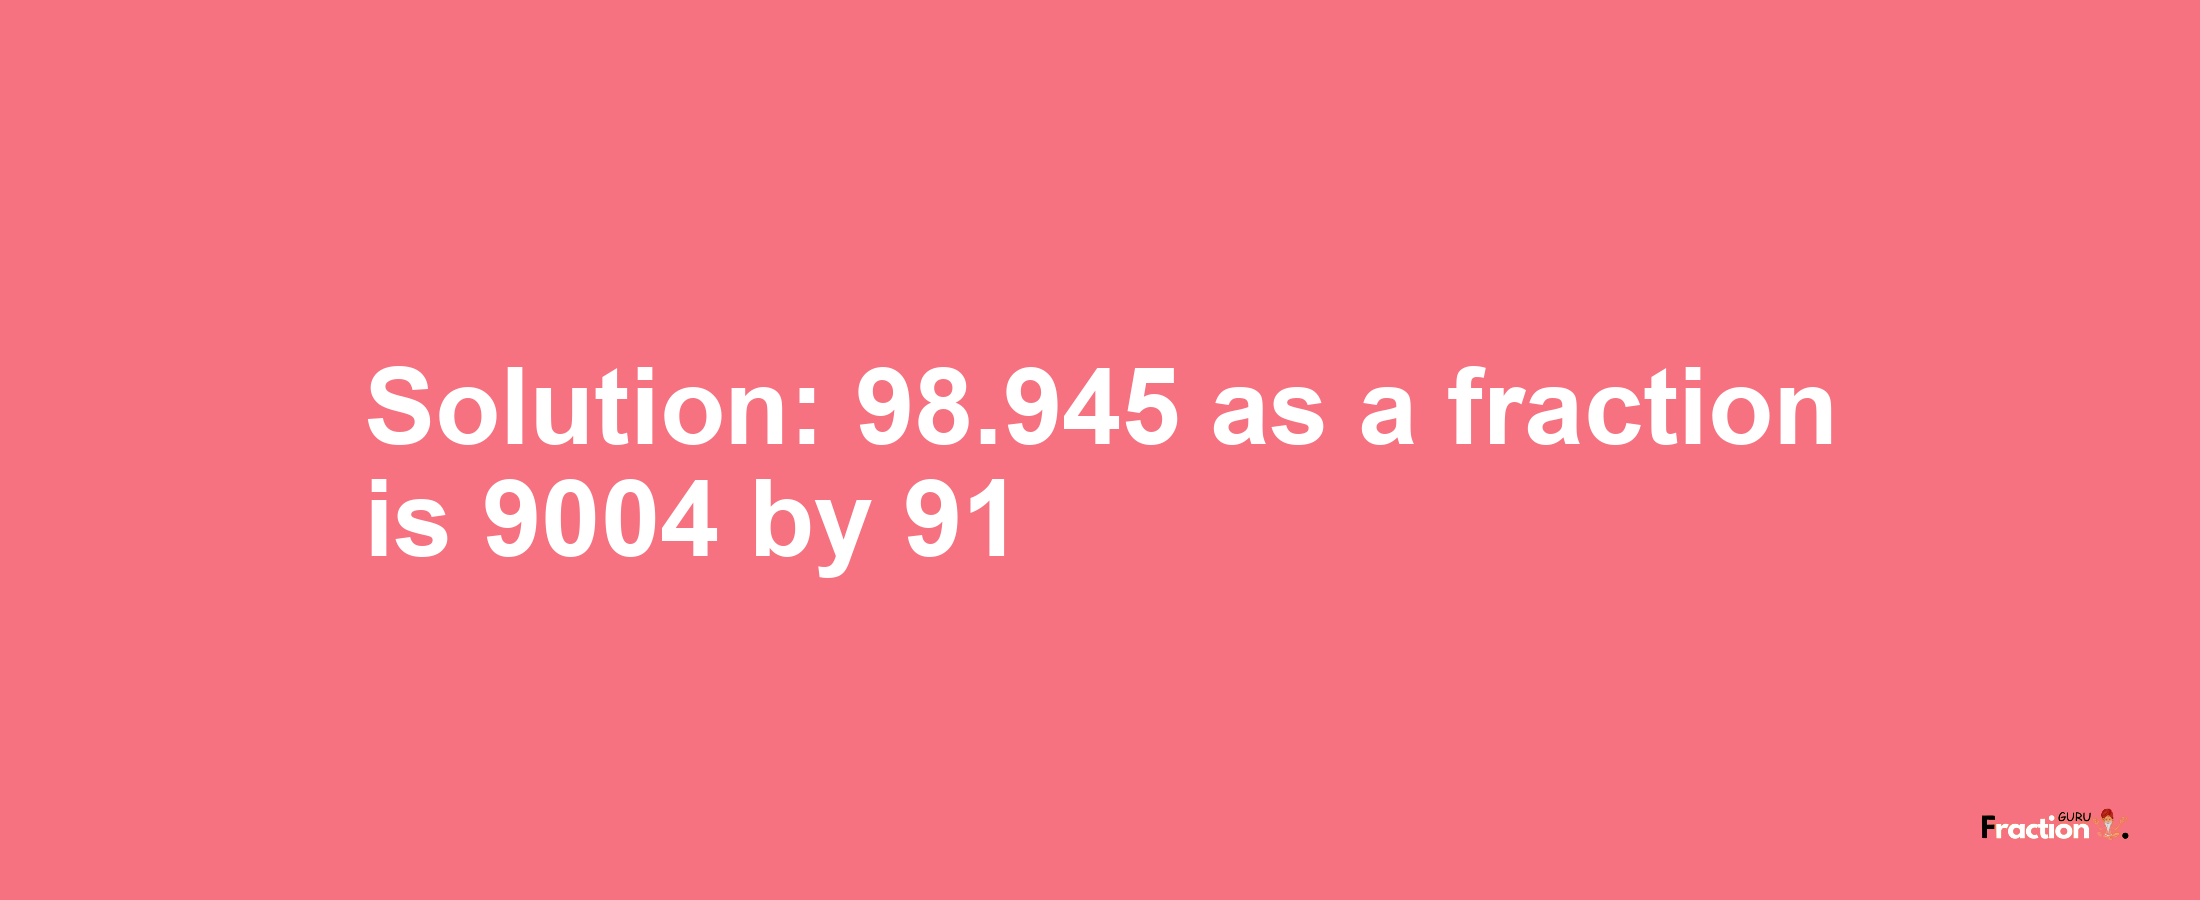 Solution:98.945 as a fraction is 9004/91